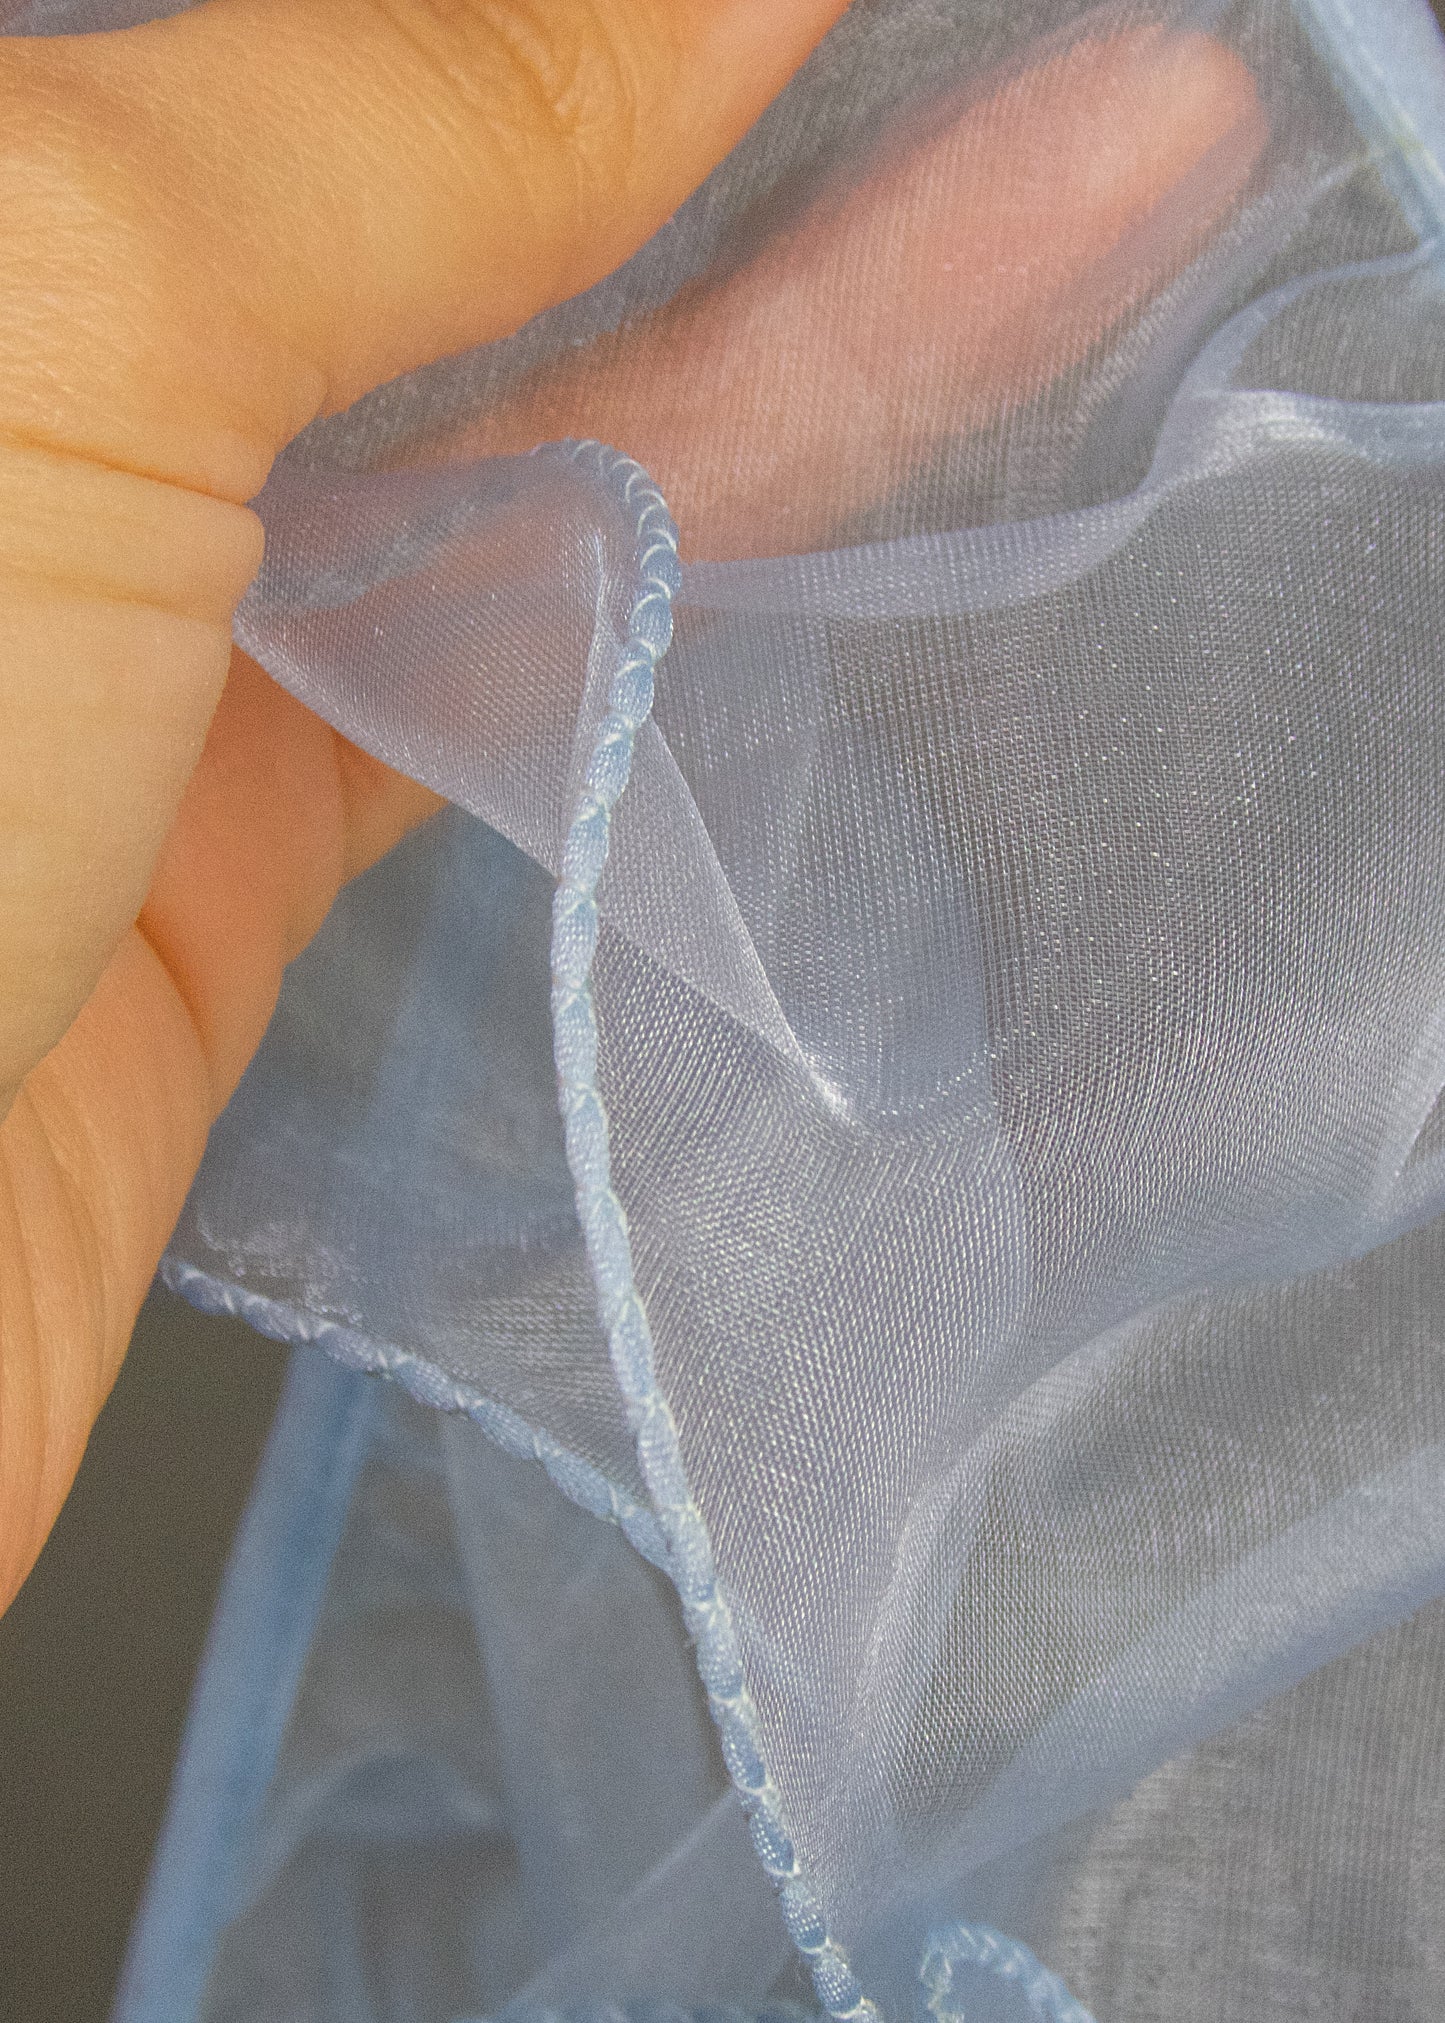 4 Inch Baby Blue Sparkle Organza Trim, Sold by the yard